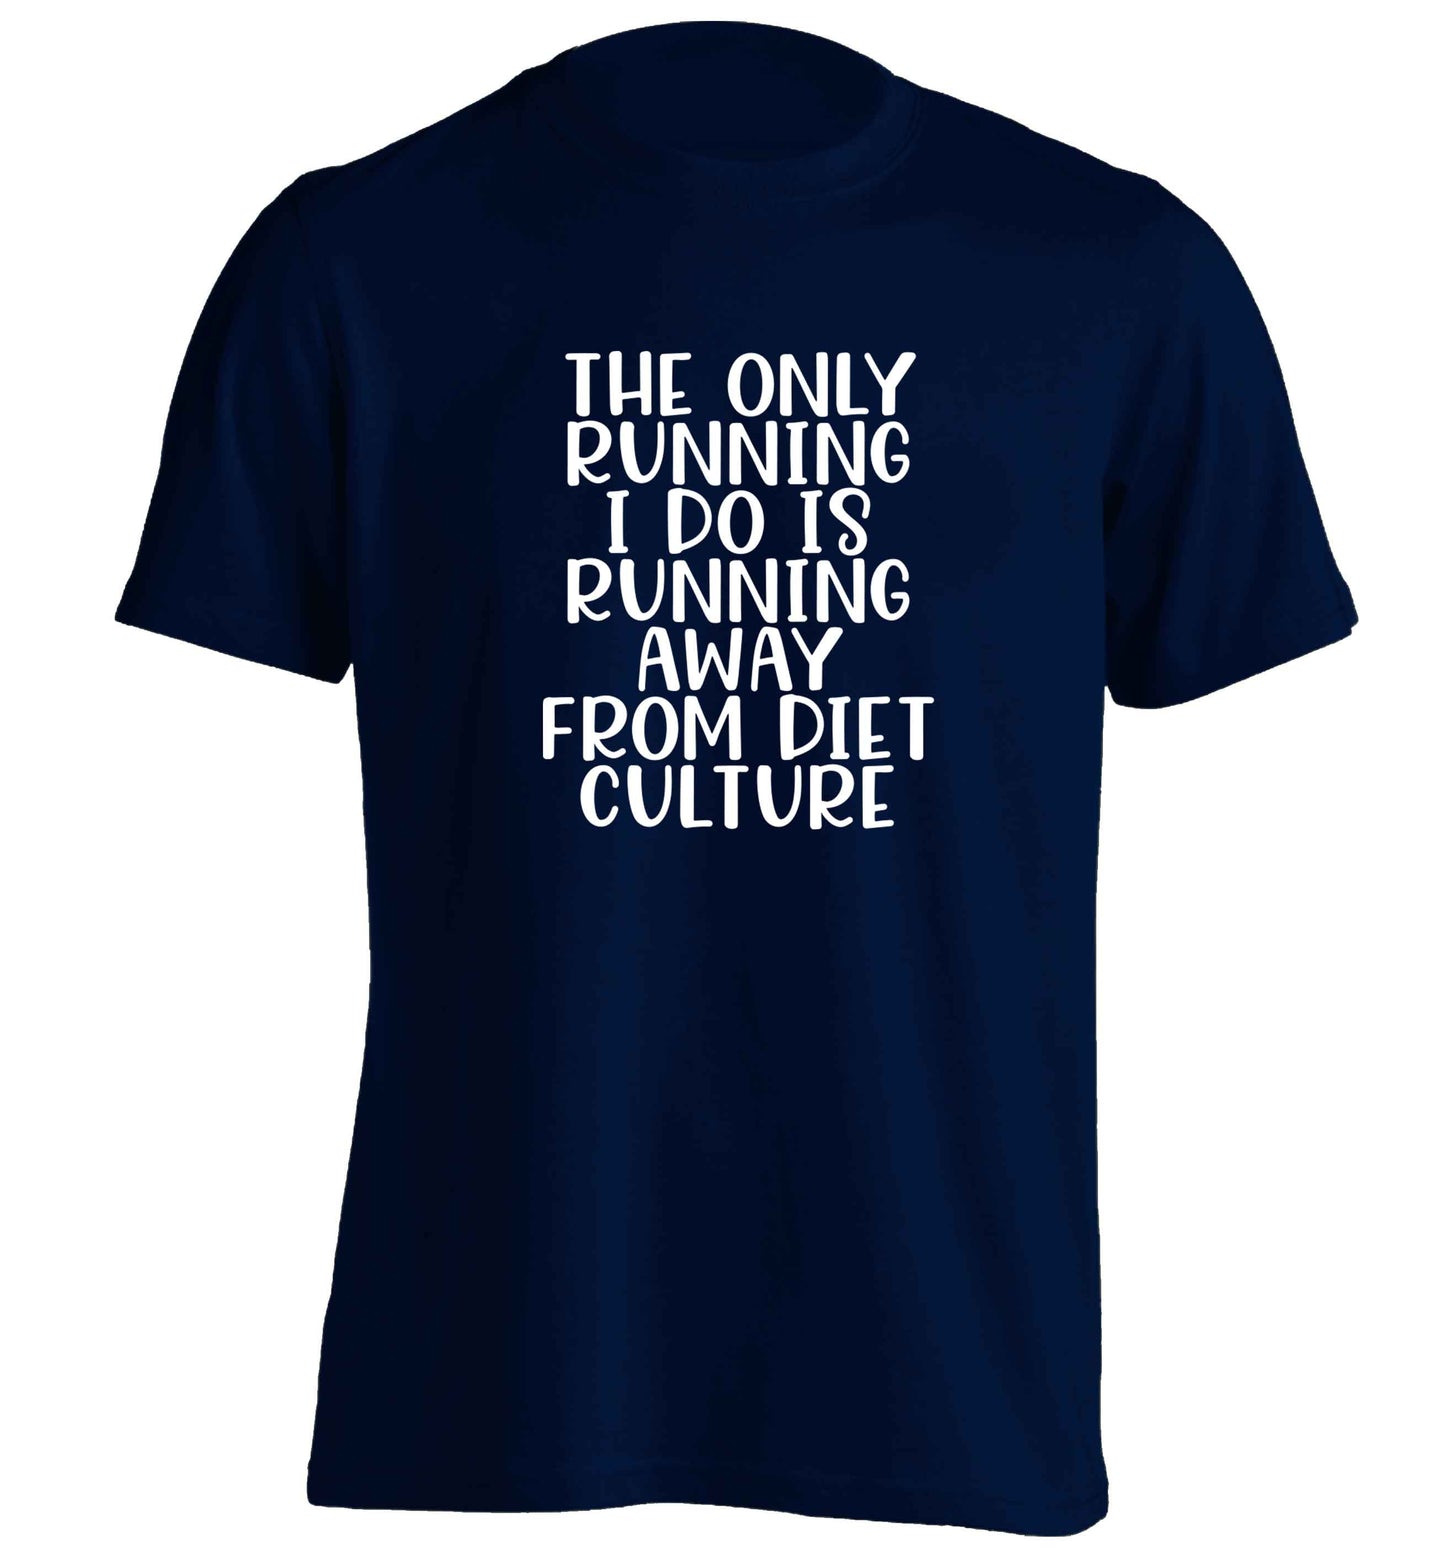 The only running I do is running away from diet culture adults unisex navy Tshirt 2XL